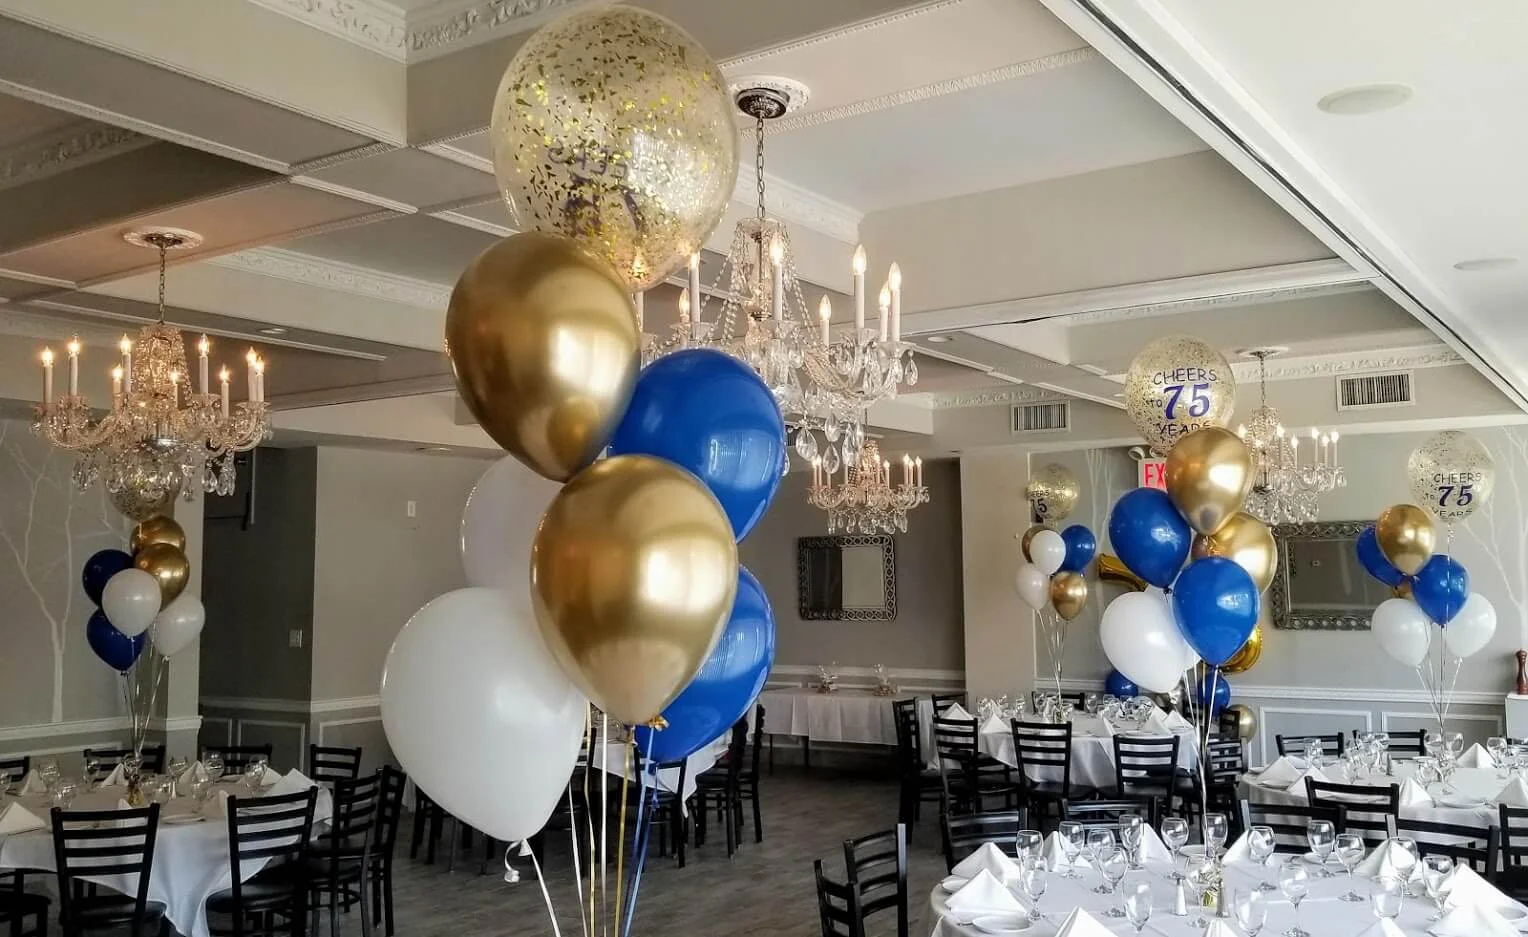 Balloons Lane's festive balloon centerpiece in Staten Island, showcasing blue, gold, and white confetti balloons arranged down the center of a table, adding a fun and celebratory touch to a birthday party.